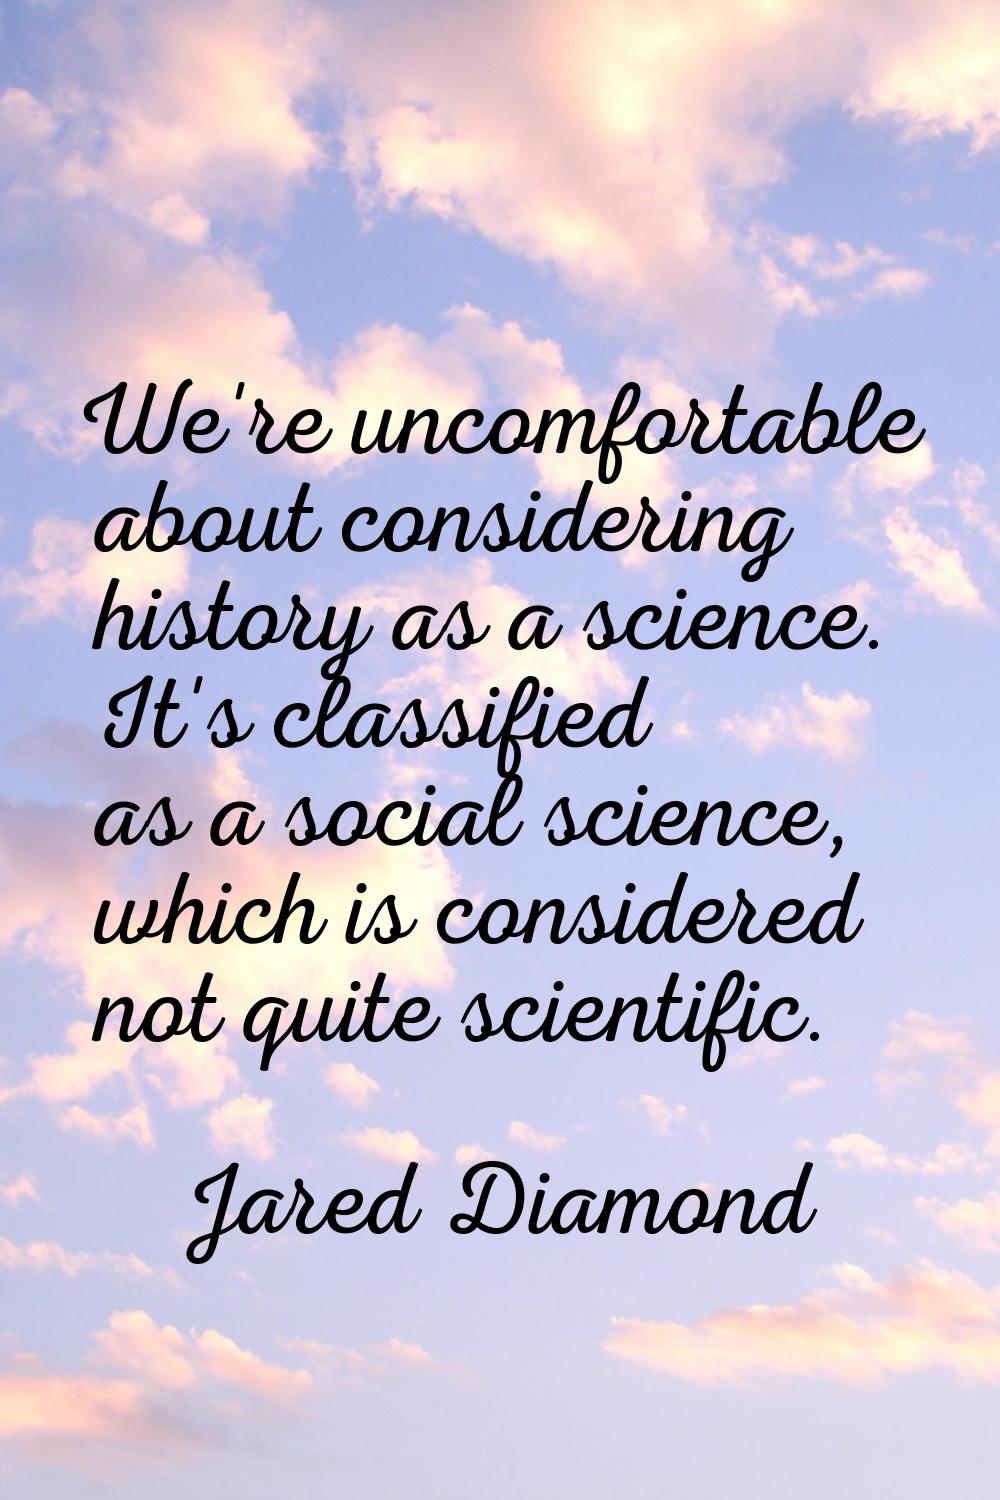 We're uncomfortable about considering history as a science. It's classified as a social science, wh